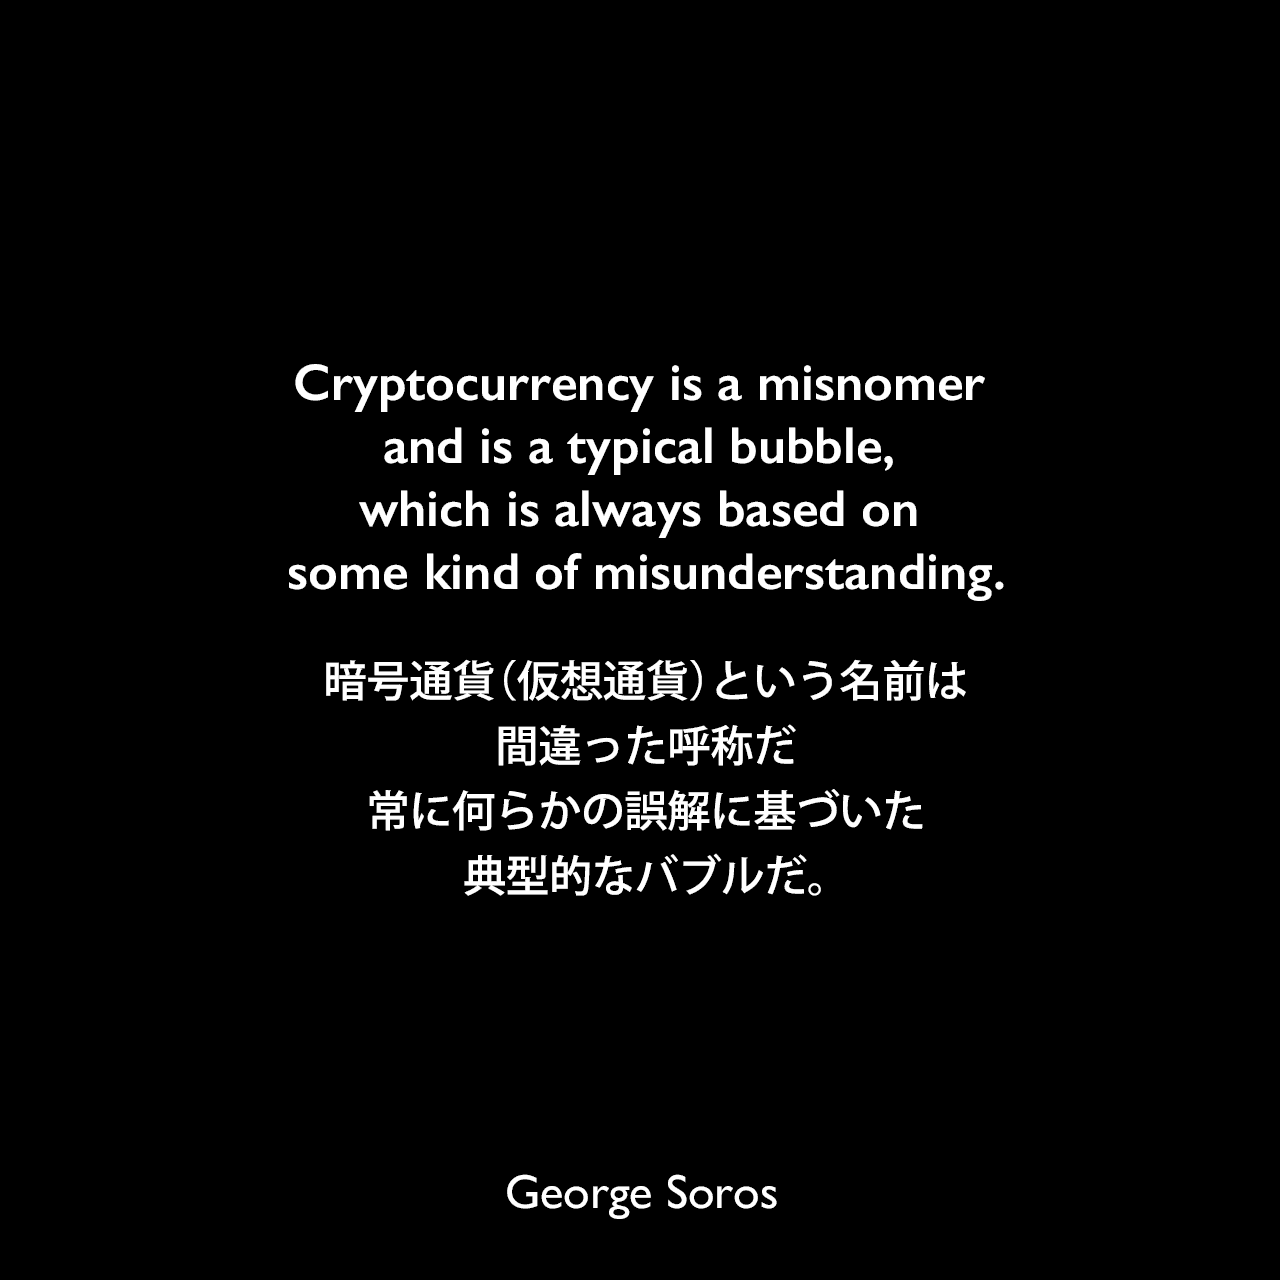 Cryptocurrency is a misnomer and is a typical bubble, which is always based on some kind of misunderstanding.暗号通貨（仮想通貨）という名前は間違った呼称だ、常に何らかの誤解に基づいた典型的なバブルだ。George Soros